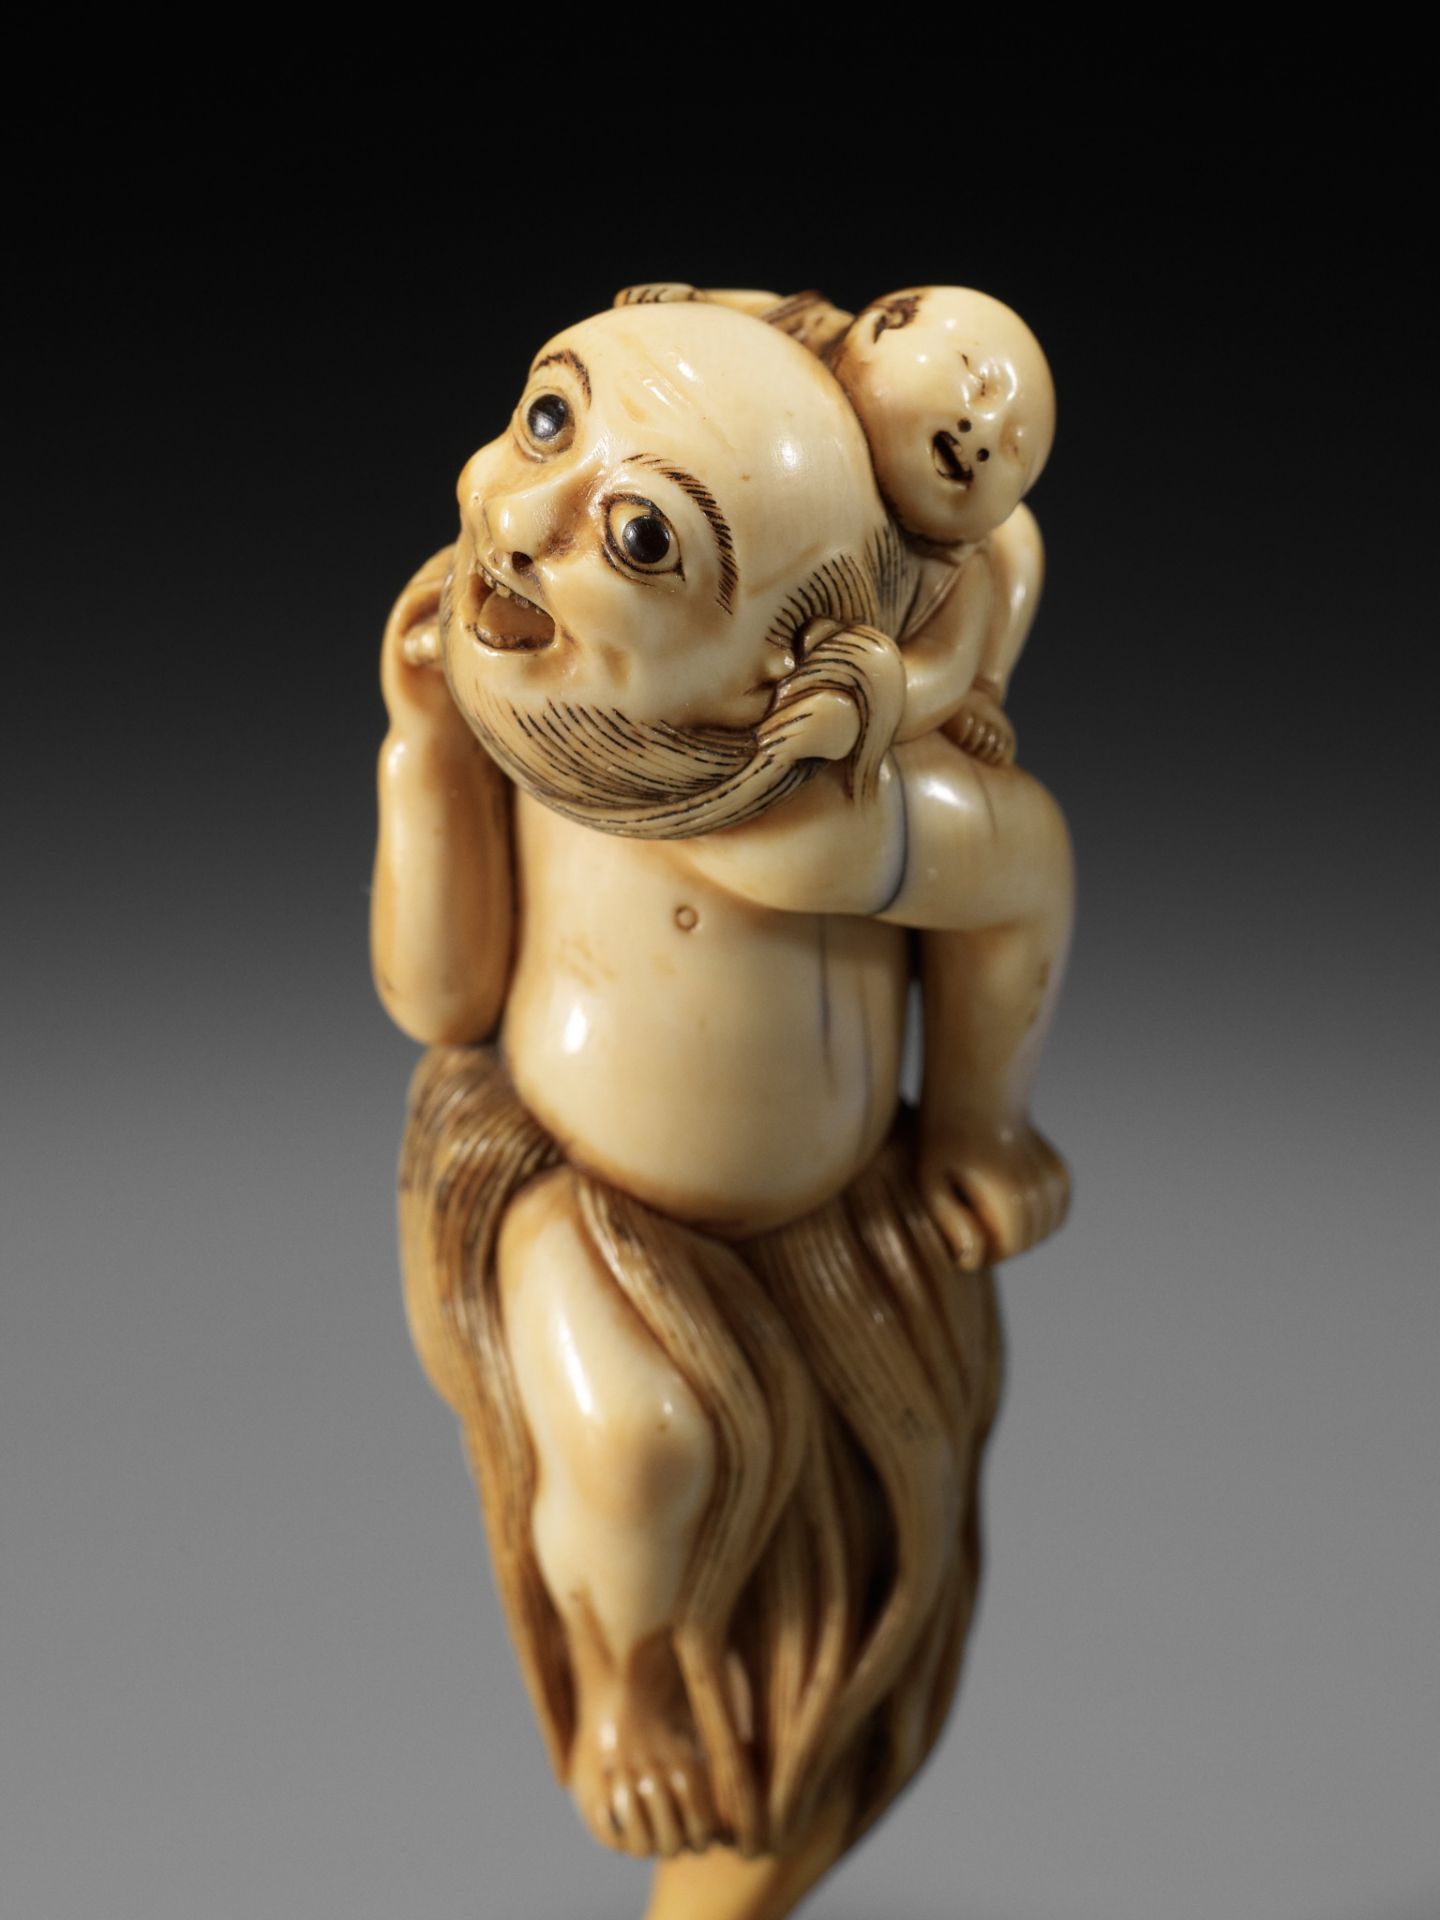 A SUPERB IVORY NETSUKE OF A FISHERMAN CARRYING A BOY, ATTRIBUTED TO GECHU